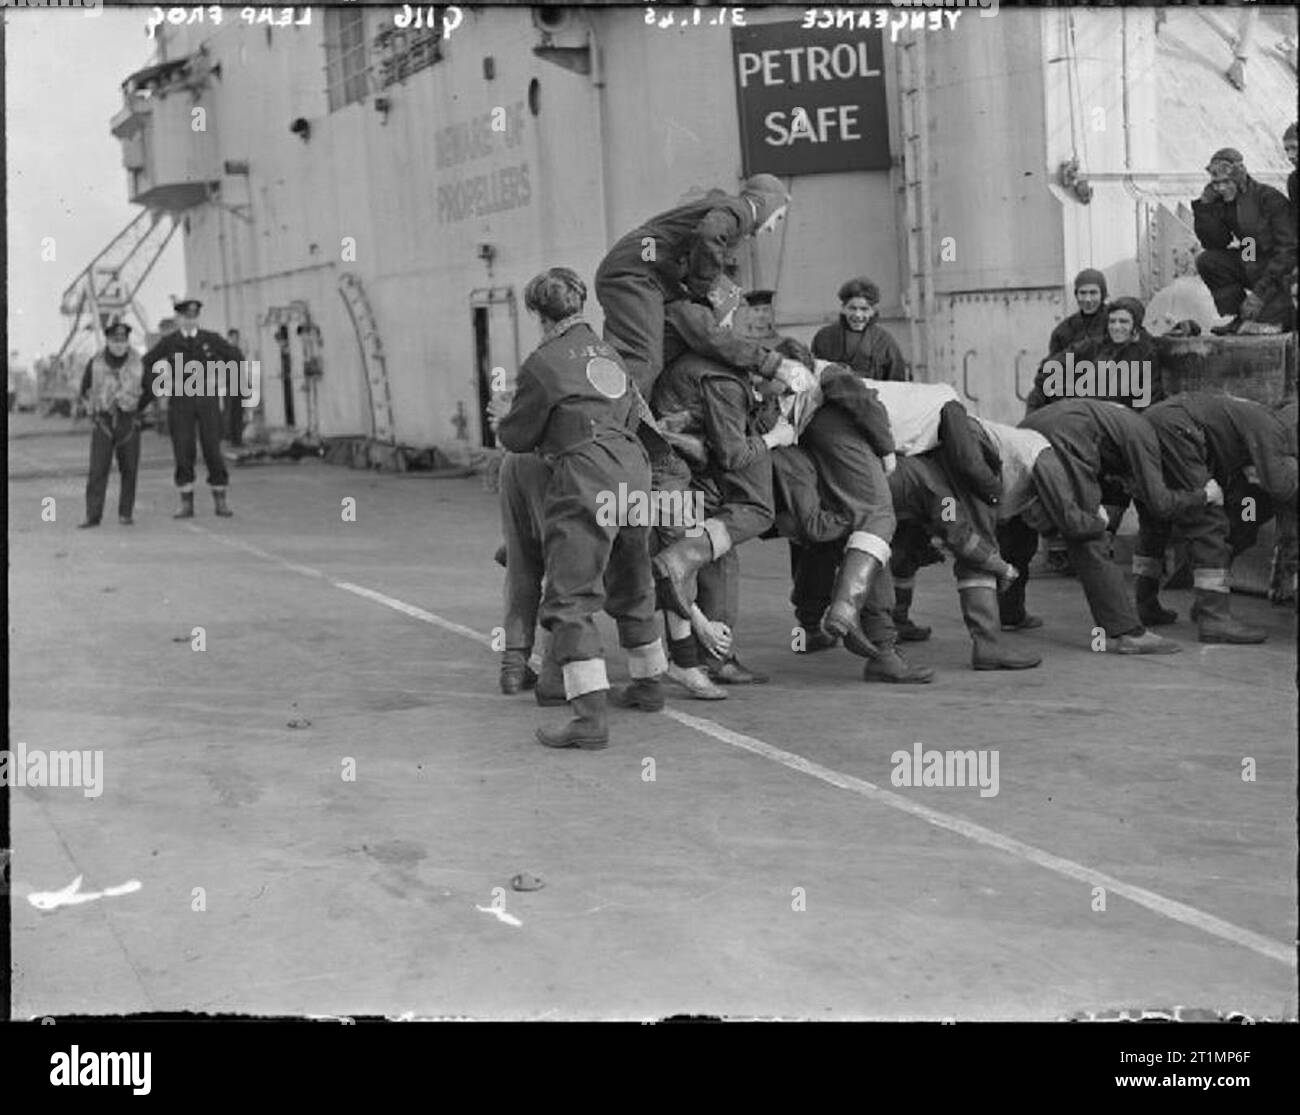 The Royal Navy during the Second World War With the men climbing on top of one another, memories of school days are harked back to during 'stand easy' for the flight deck party on board the light fleet carrier HMS VENGEANCE in the Clyde during aircraft trials. Stock Photo